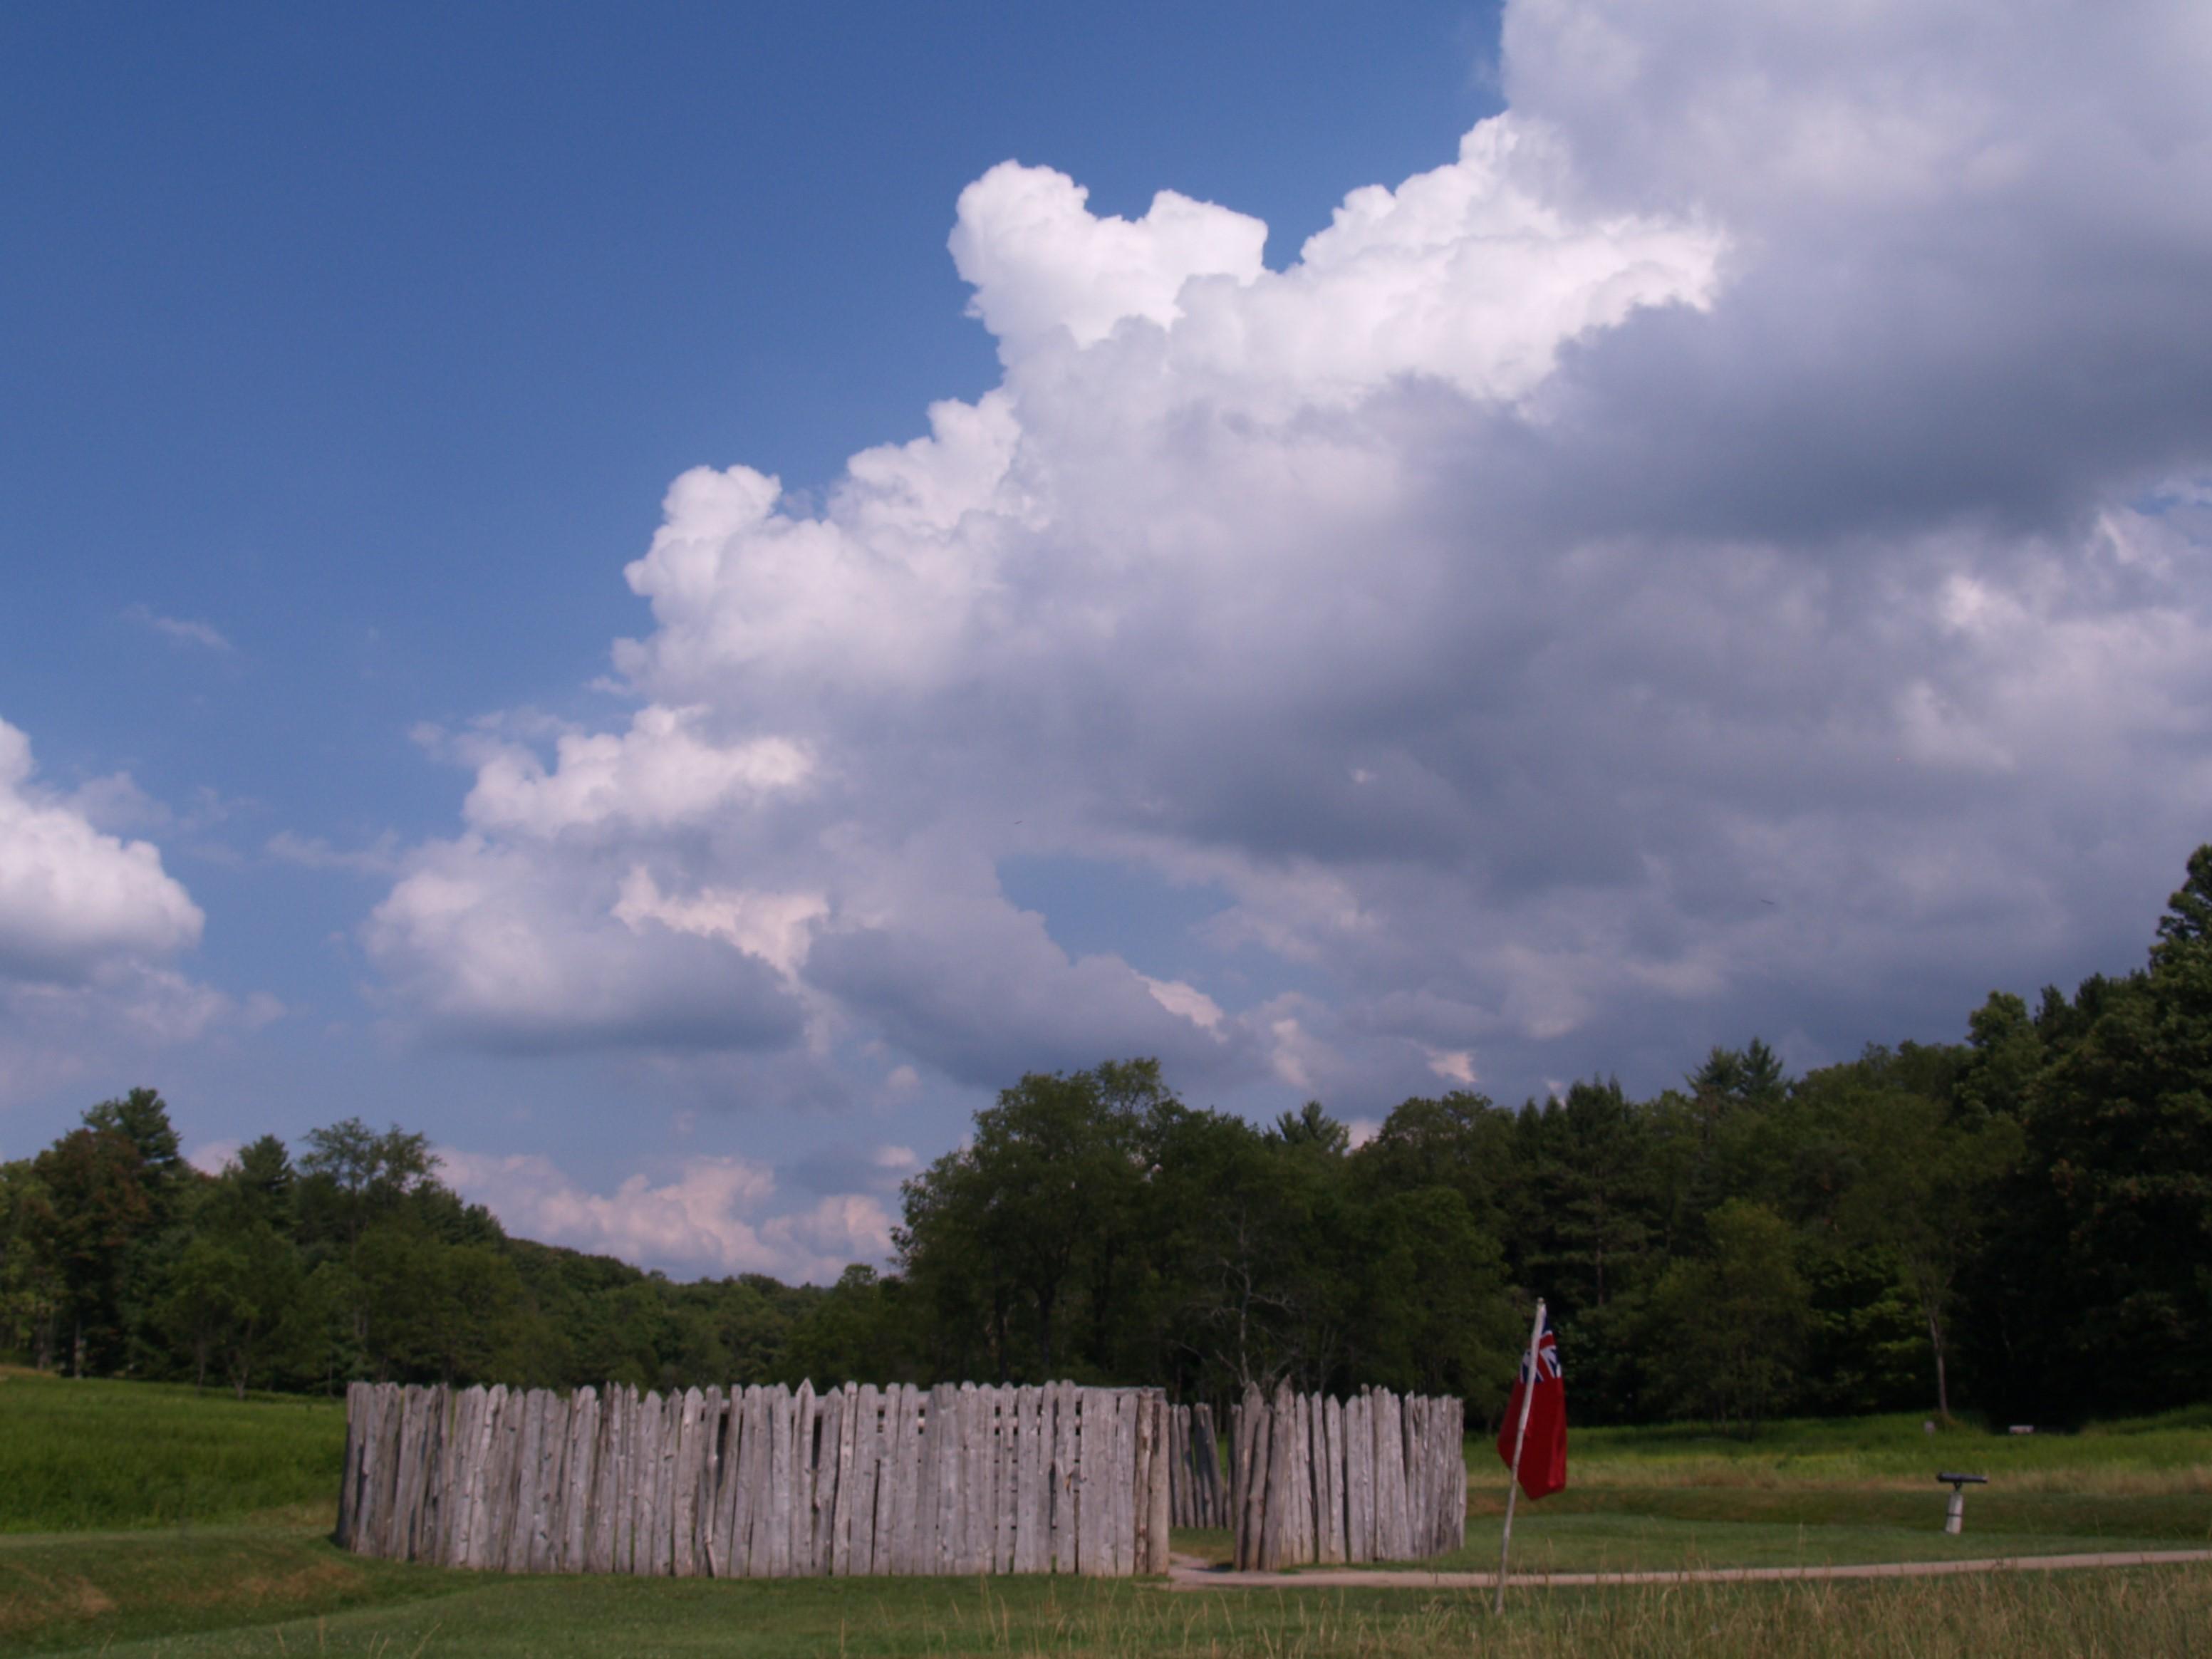 Circular stockade in the middle of a meadow. Dramatic clouds build in the blue sky.